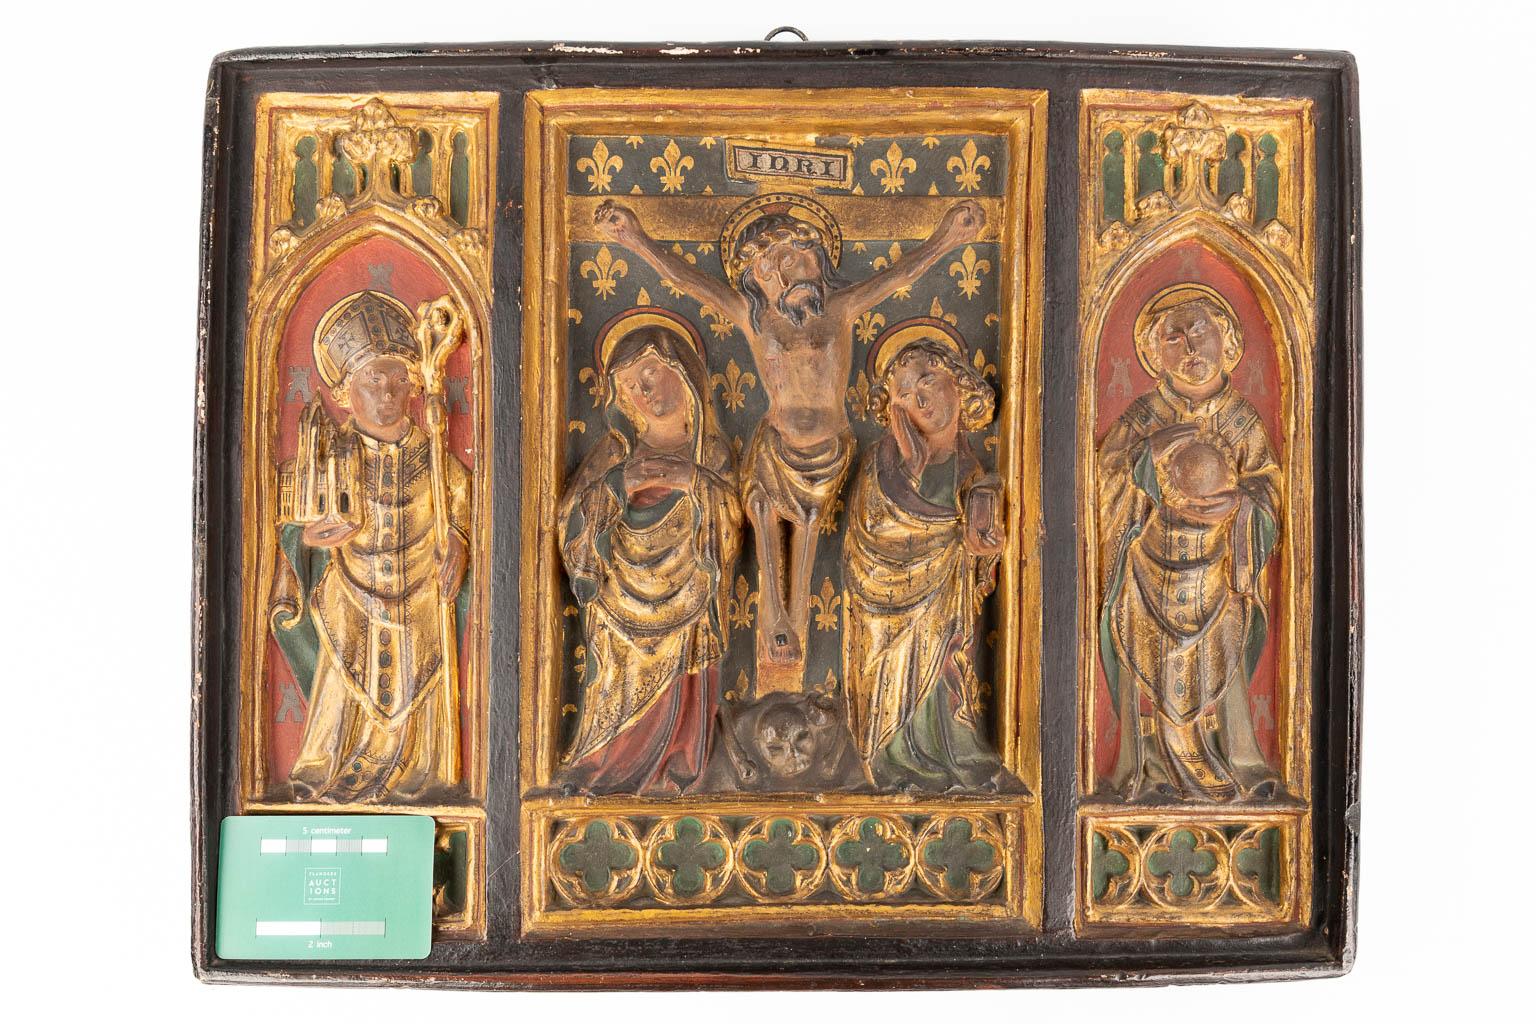 A religious Triptych made of patinated plaster in gothic revival style. 20th C. (W: 46 x H: 37 cm)